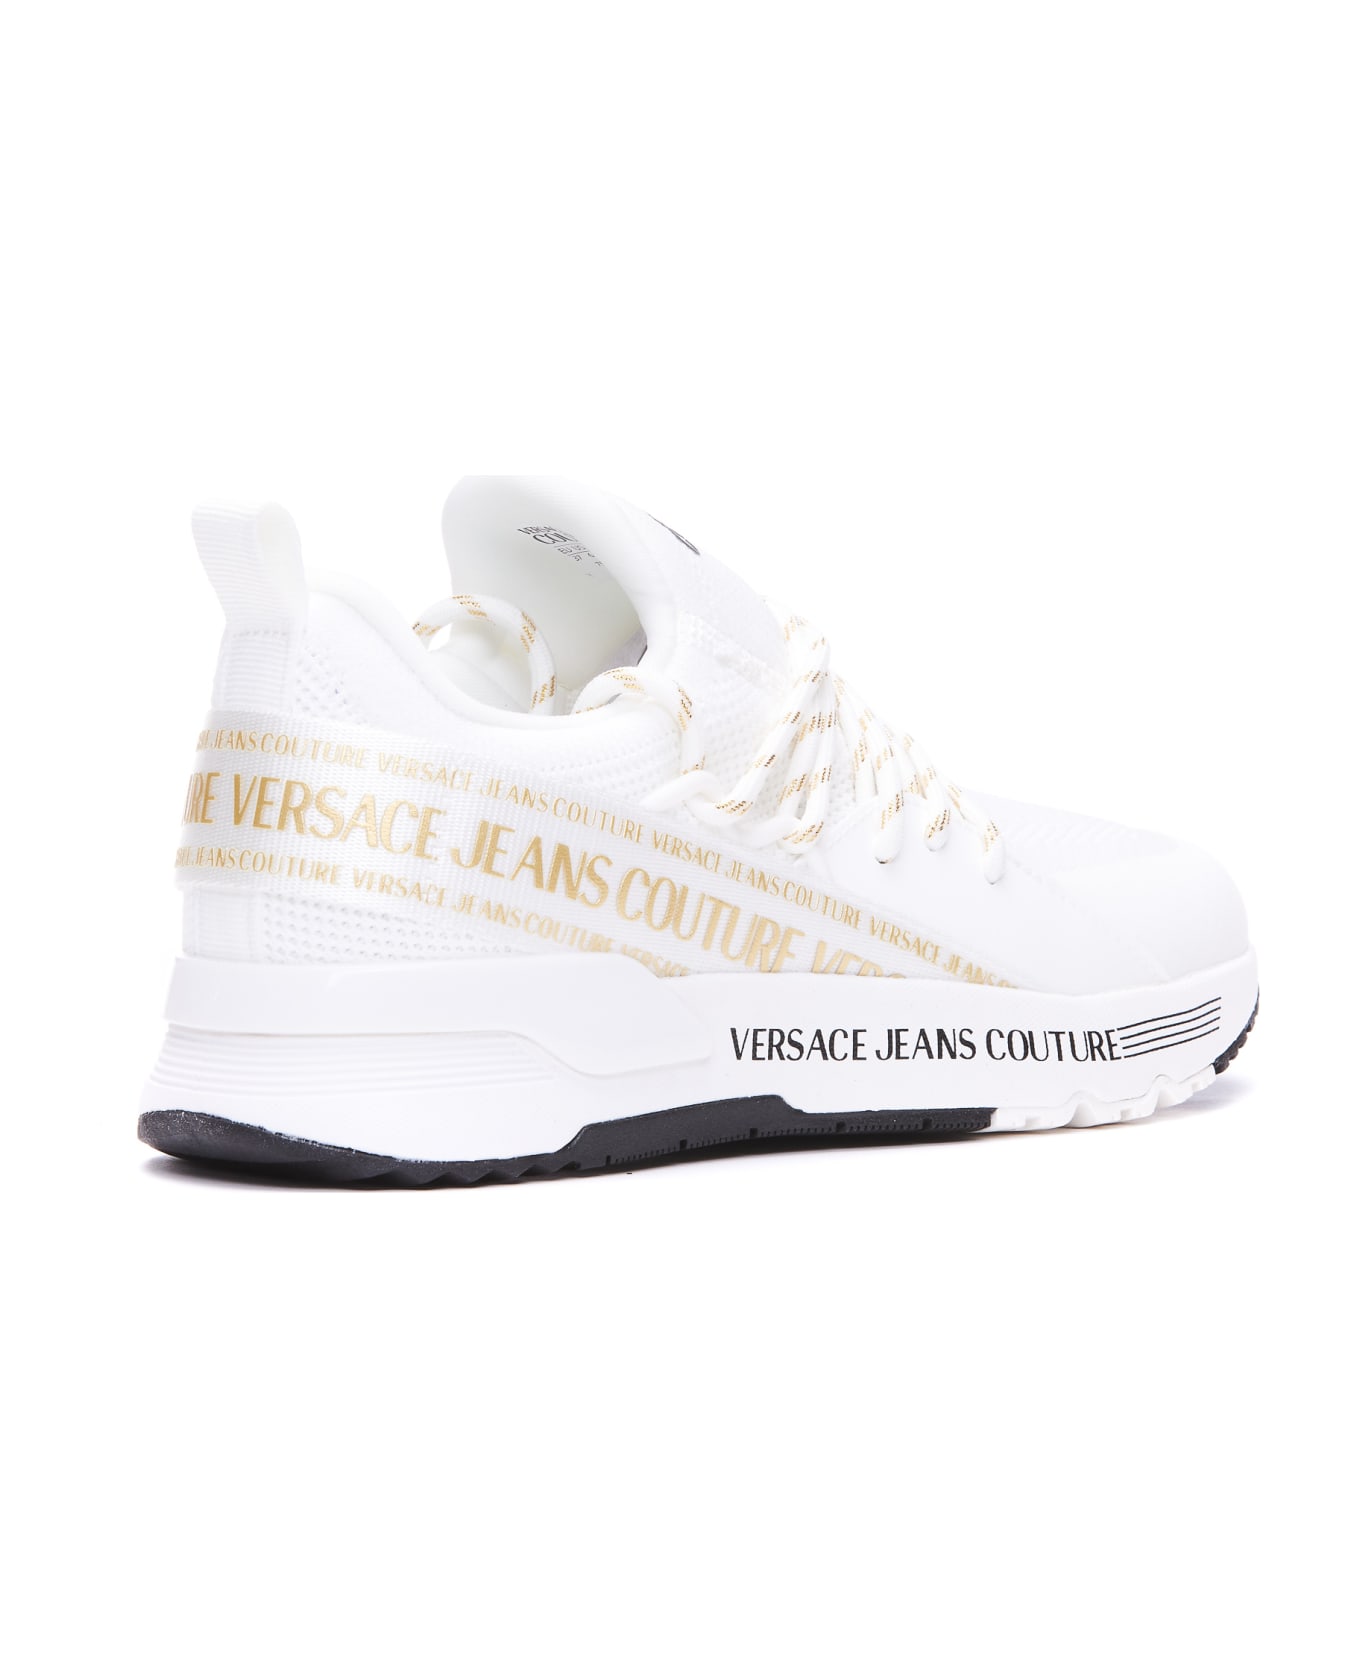 Versace Jeans Couture Dynamic Sneakers - WHITE GOLD スニーカー